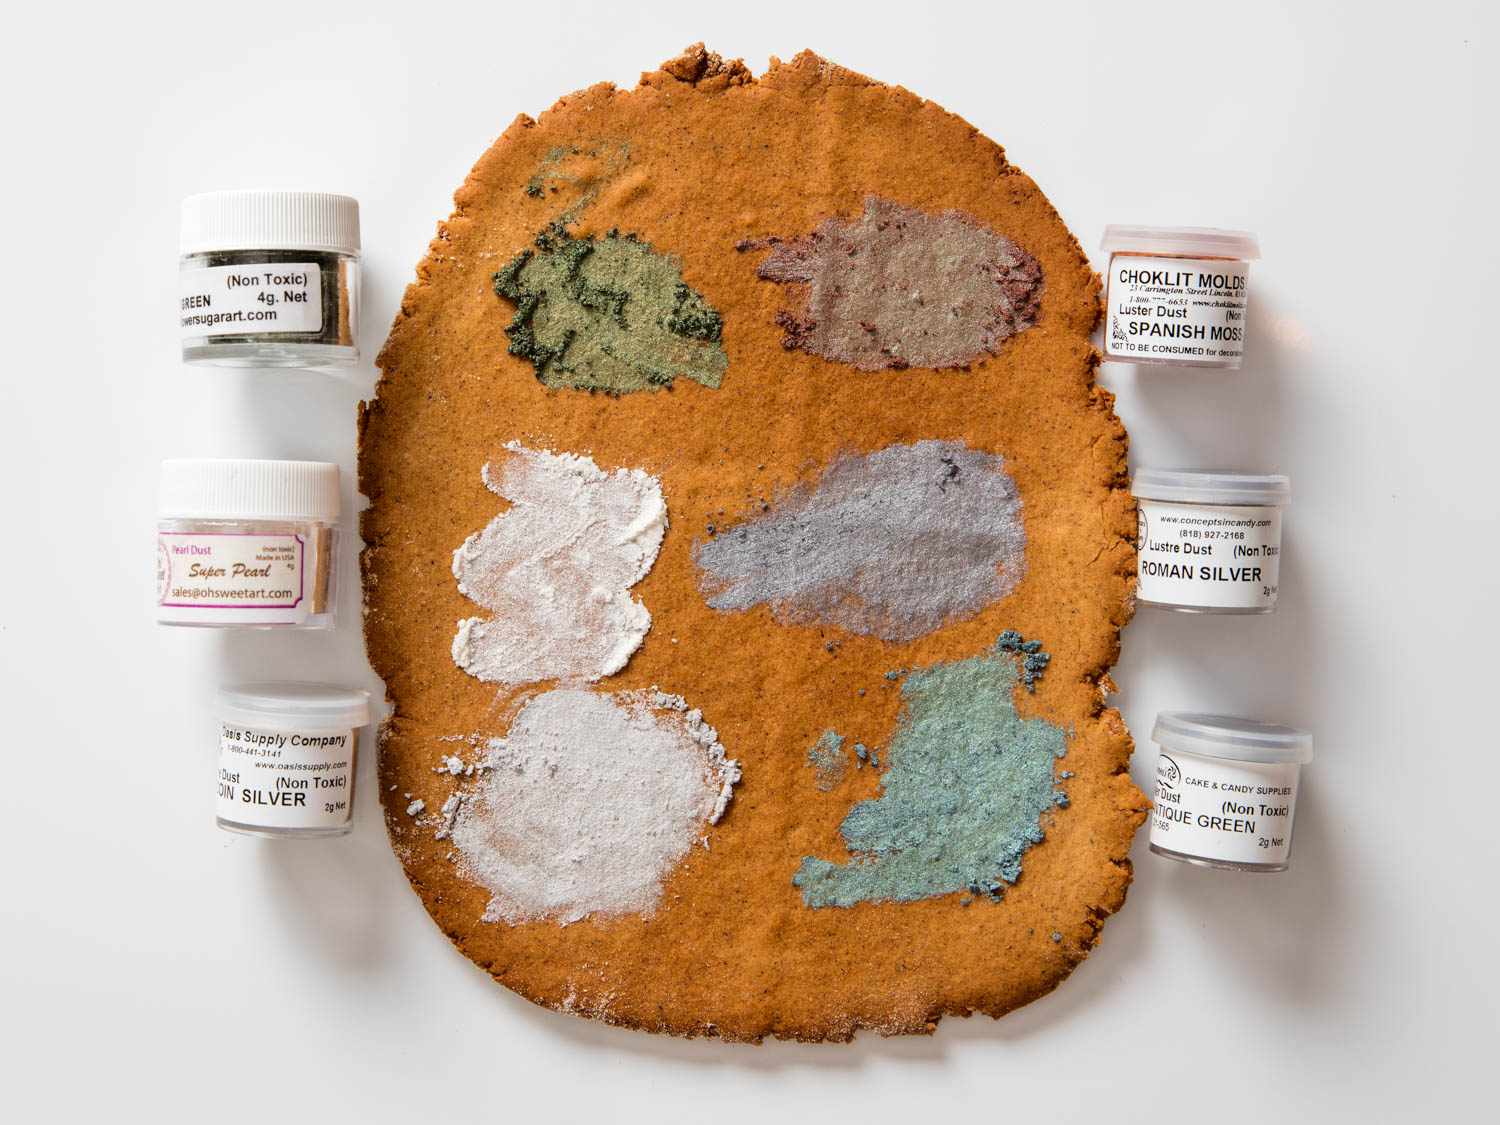 Samples of luster dust in various dull colors, against a slab of gingerbread